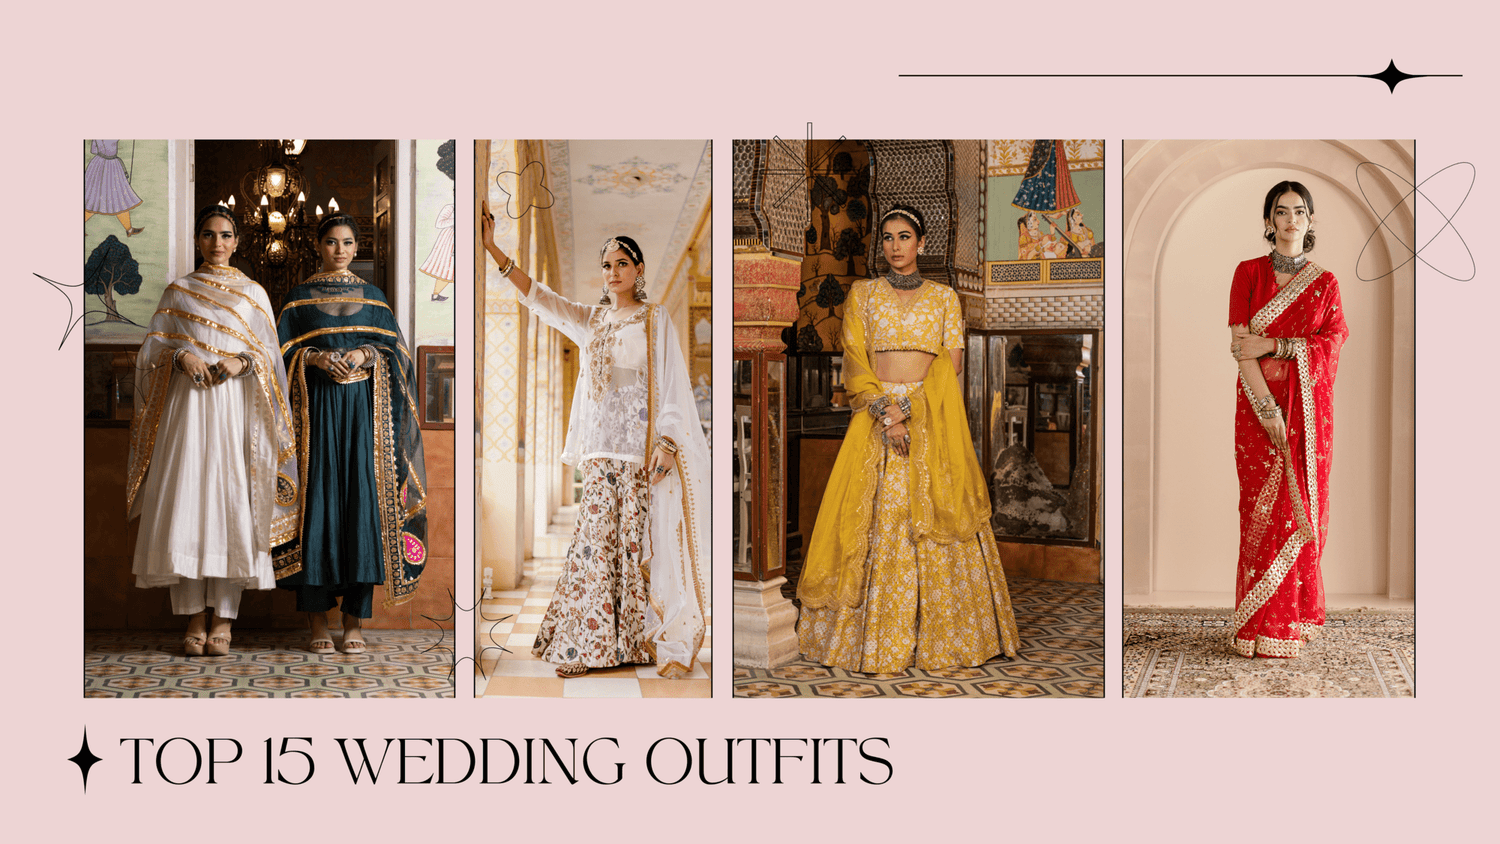 TOP 15 WEDDING OUTFITS